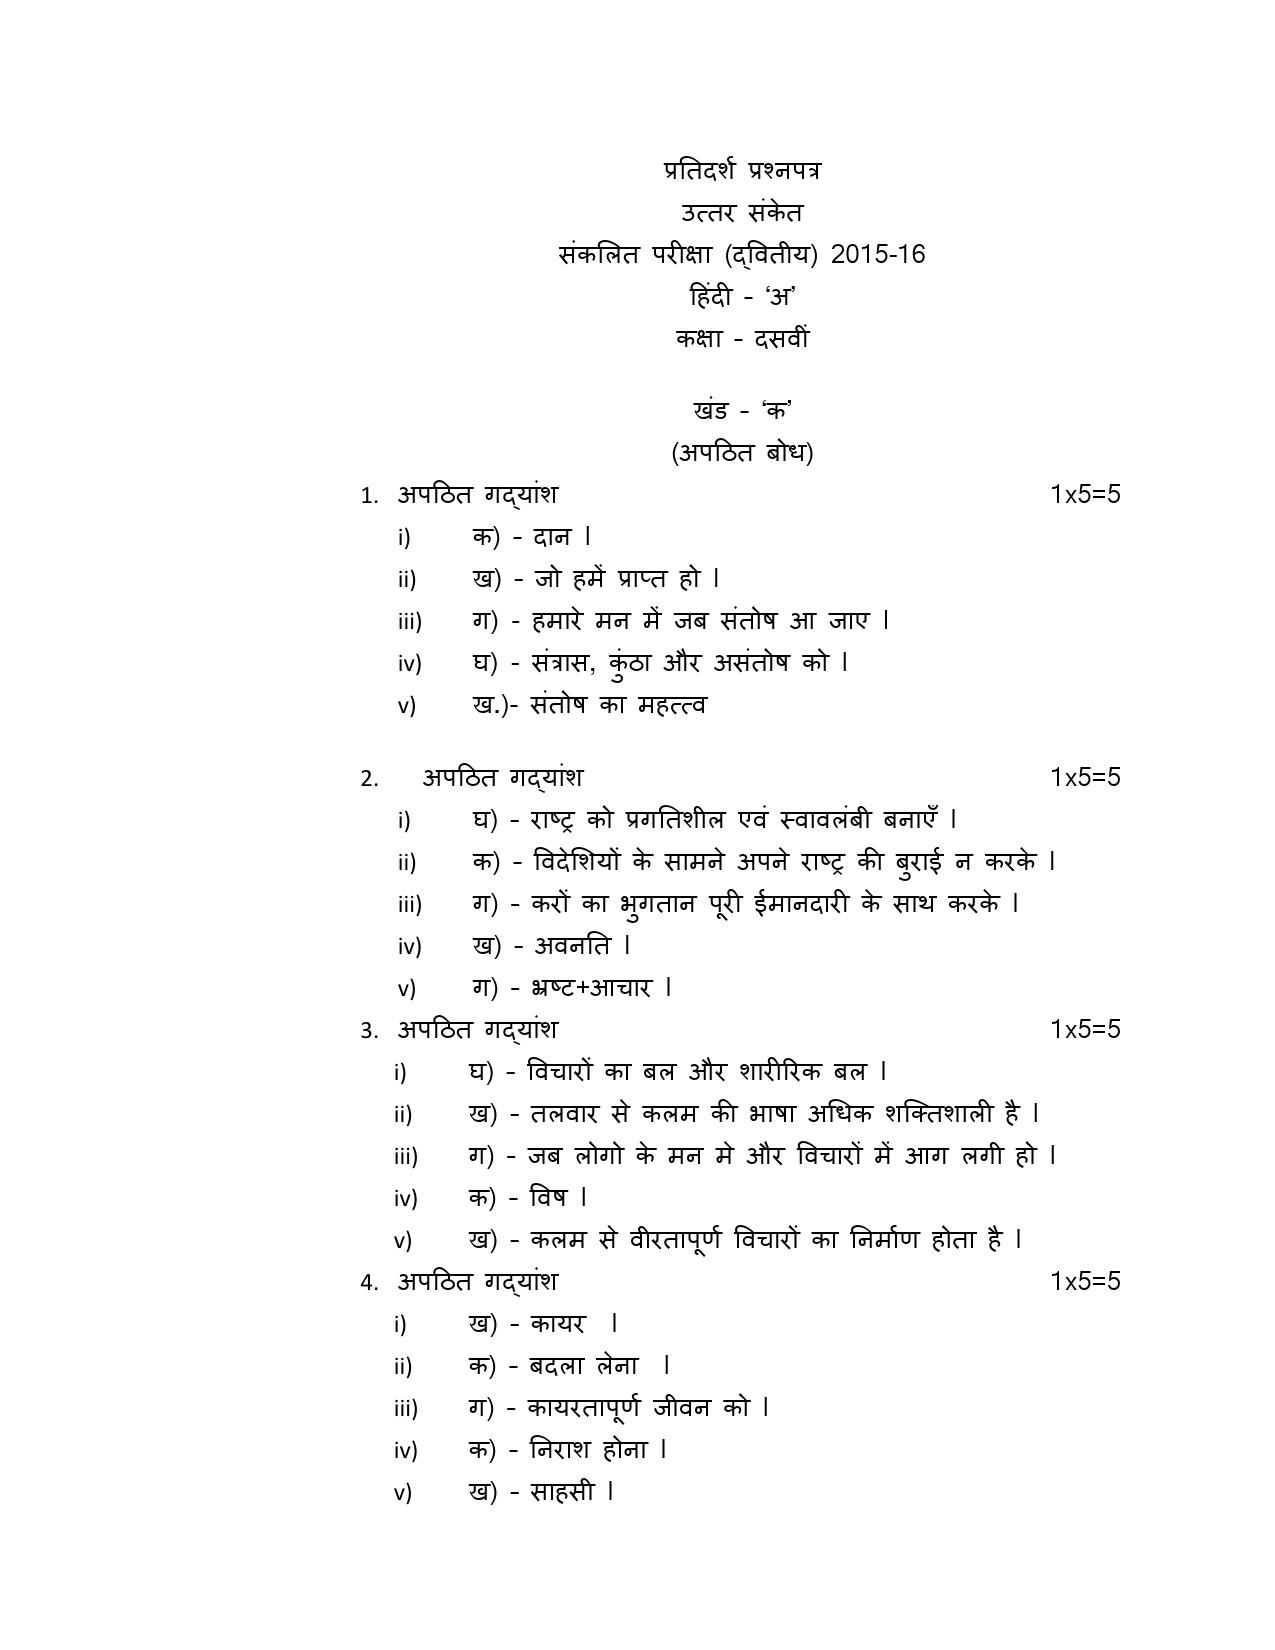 Hindi A CBSE Class X Sample Question Paper 2015 16 - Image 11